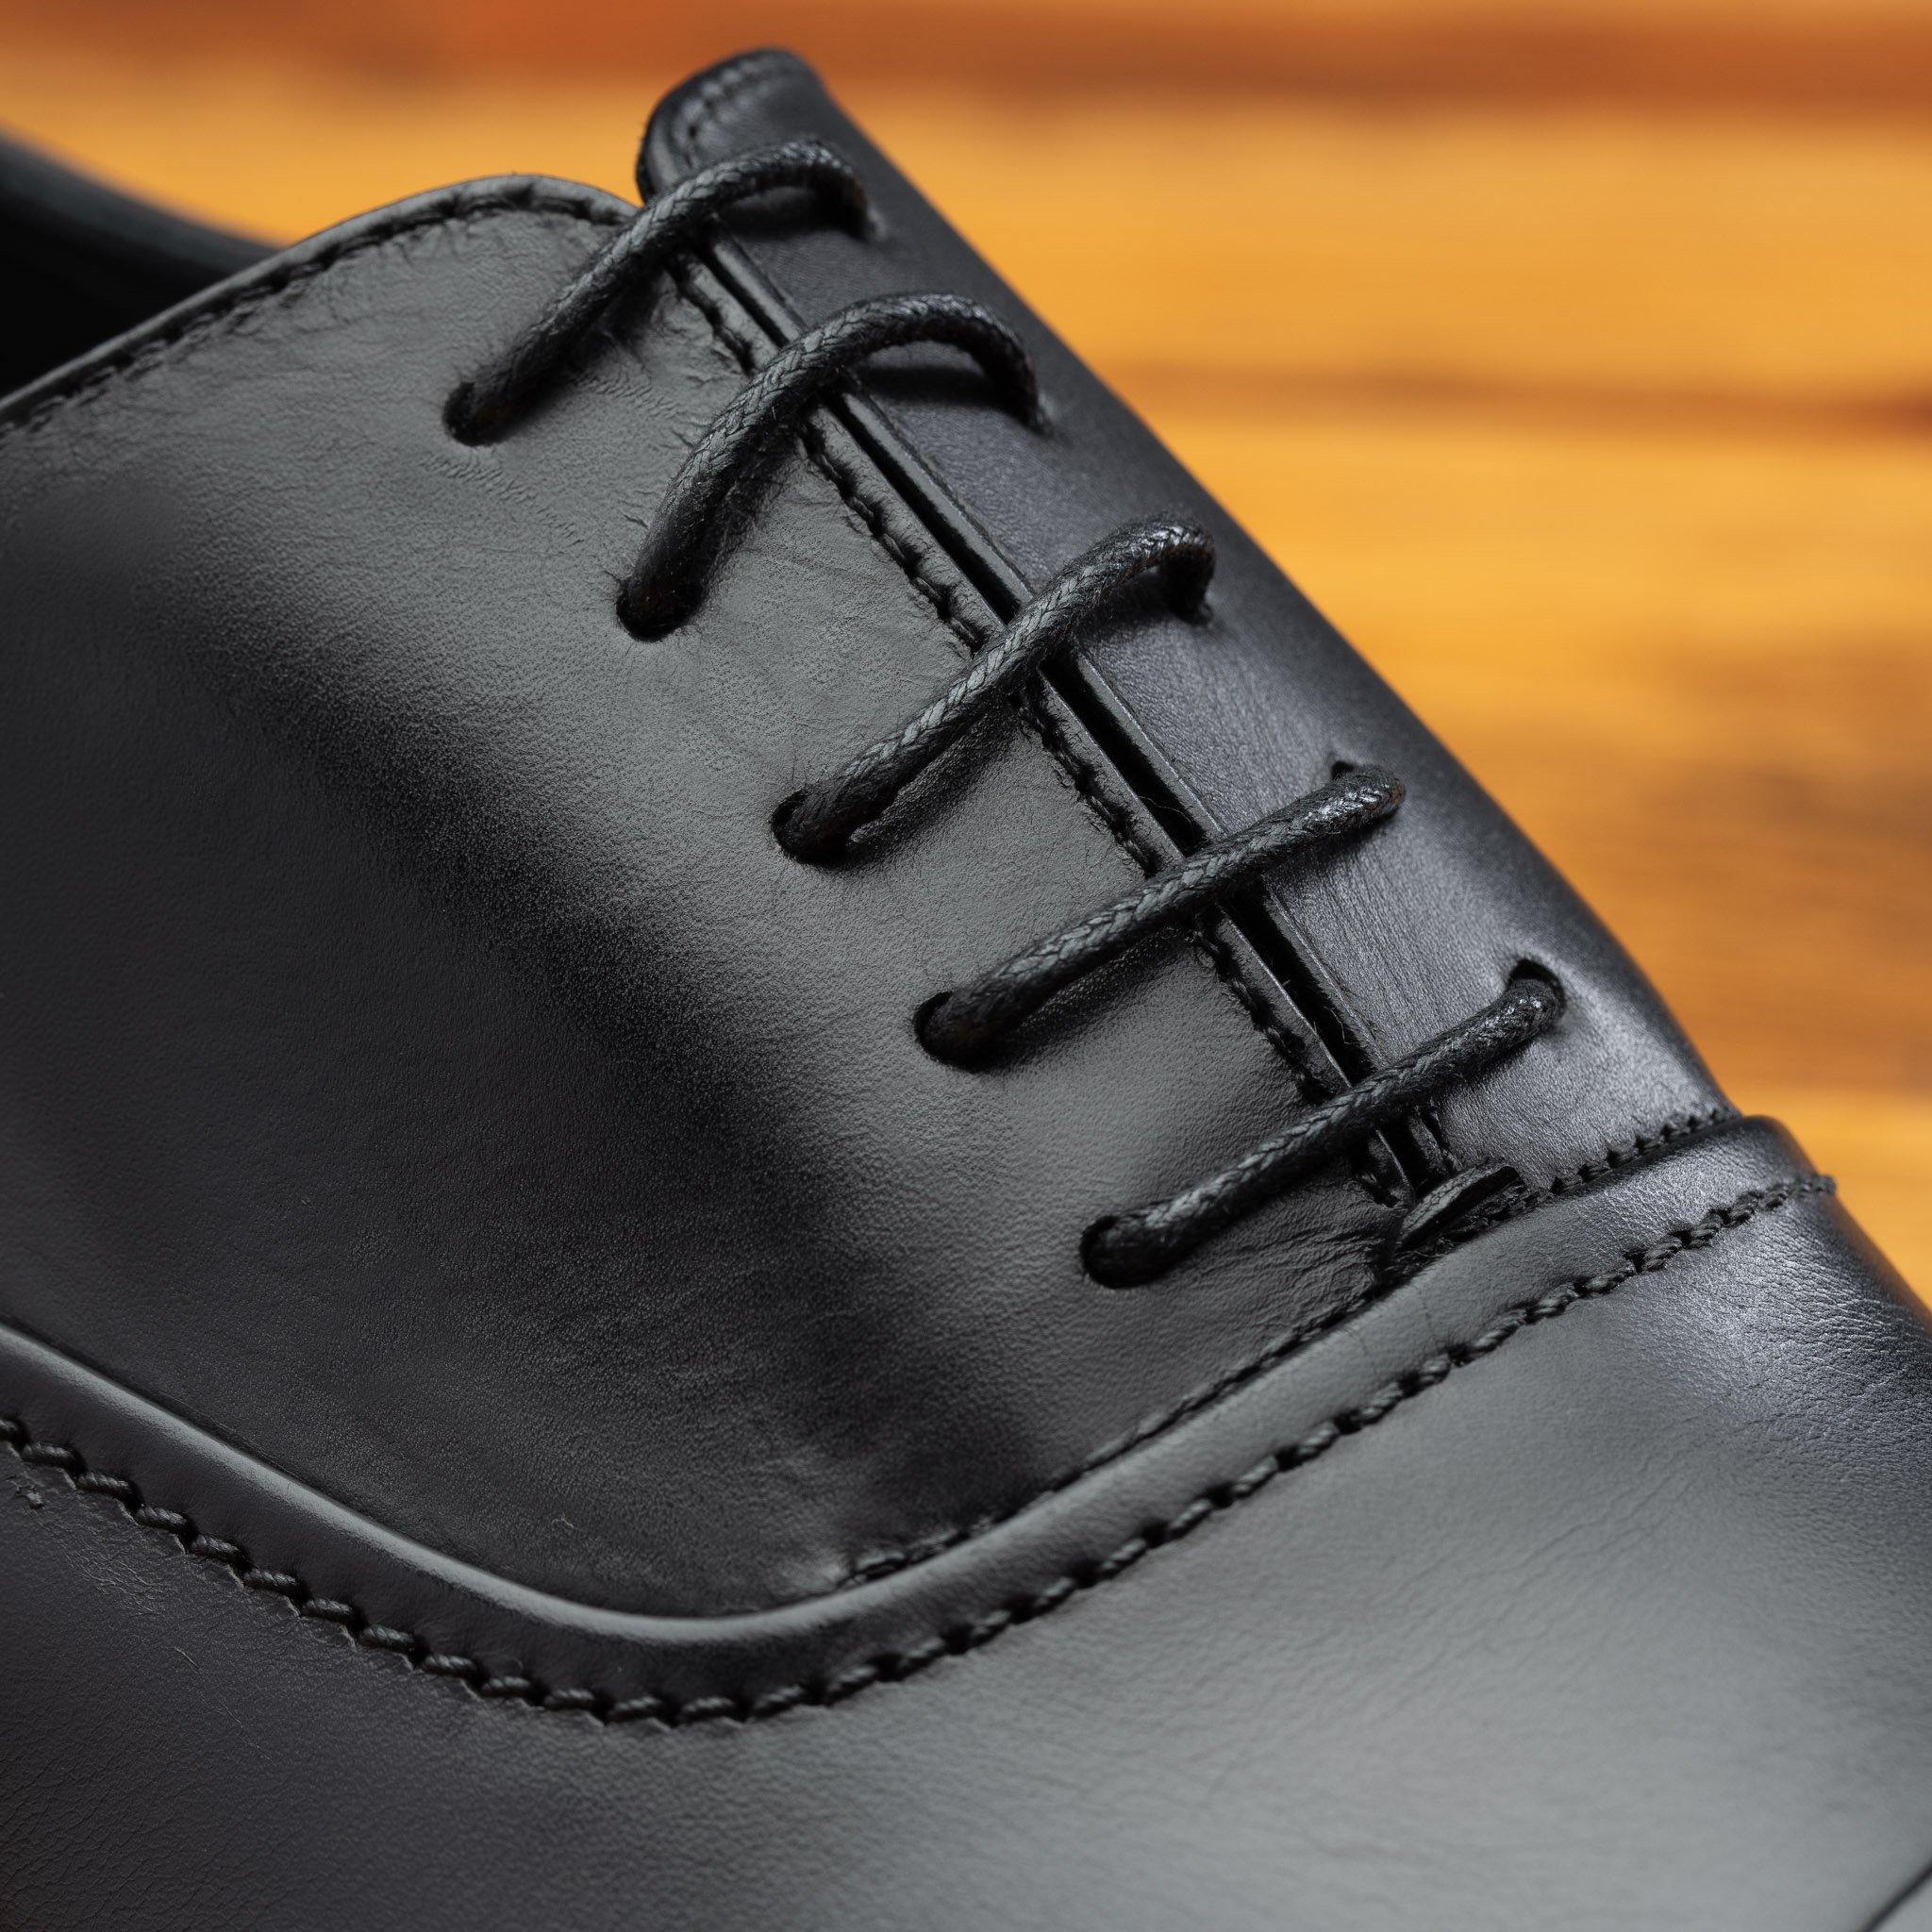 Up close picture of the 5 eyelet of 2361 Calzoleria  Toscana Black Cayenne Calf Cap Toe